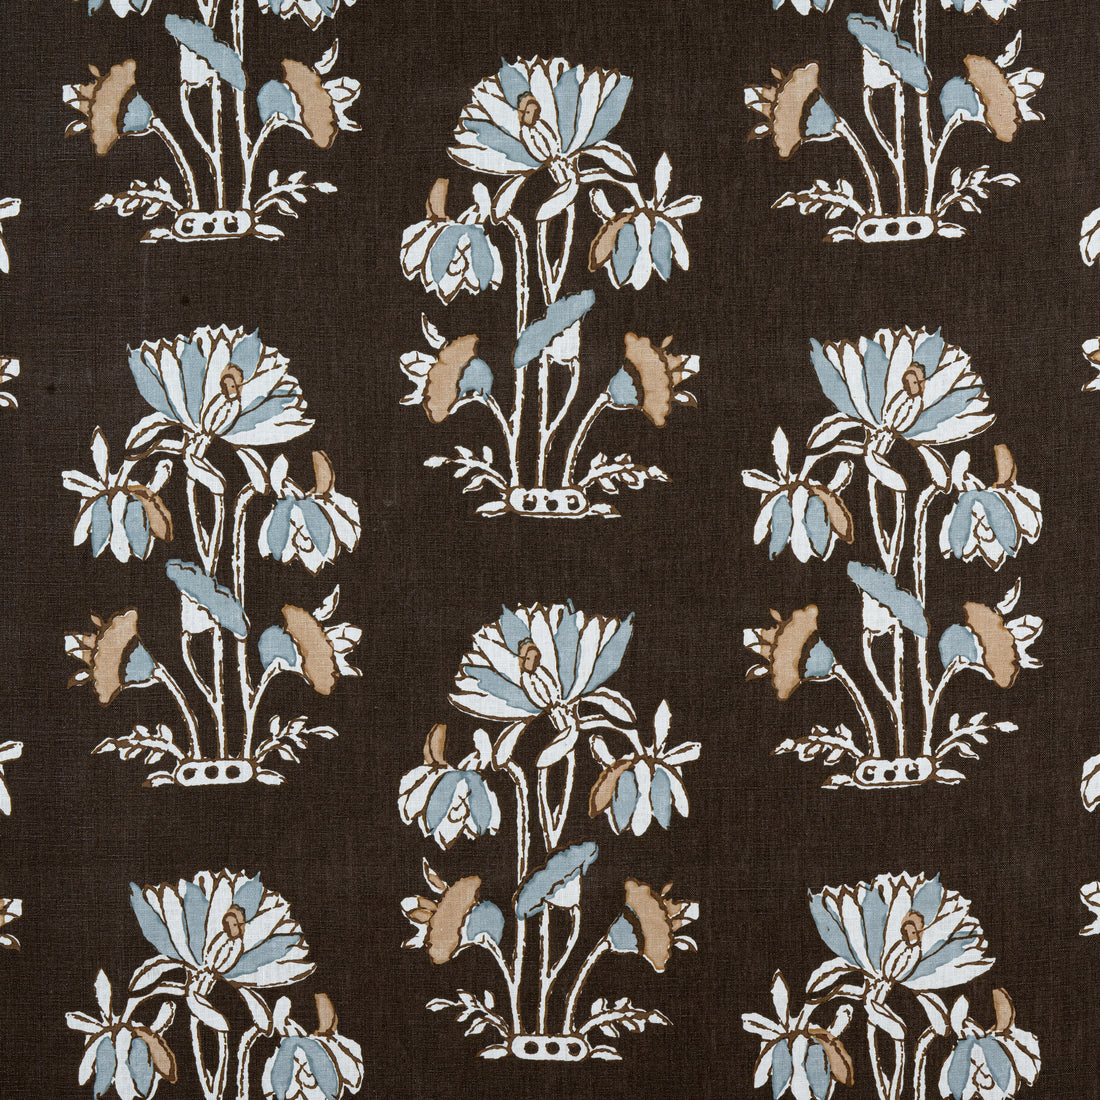 Lily Flower fabric in black color - pattern number F913200 - by Thibaut in the Mesa collection